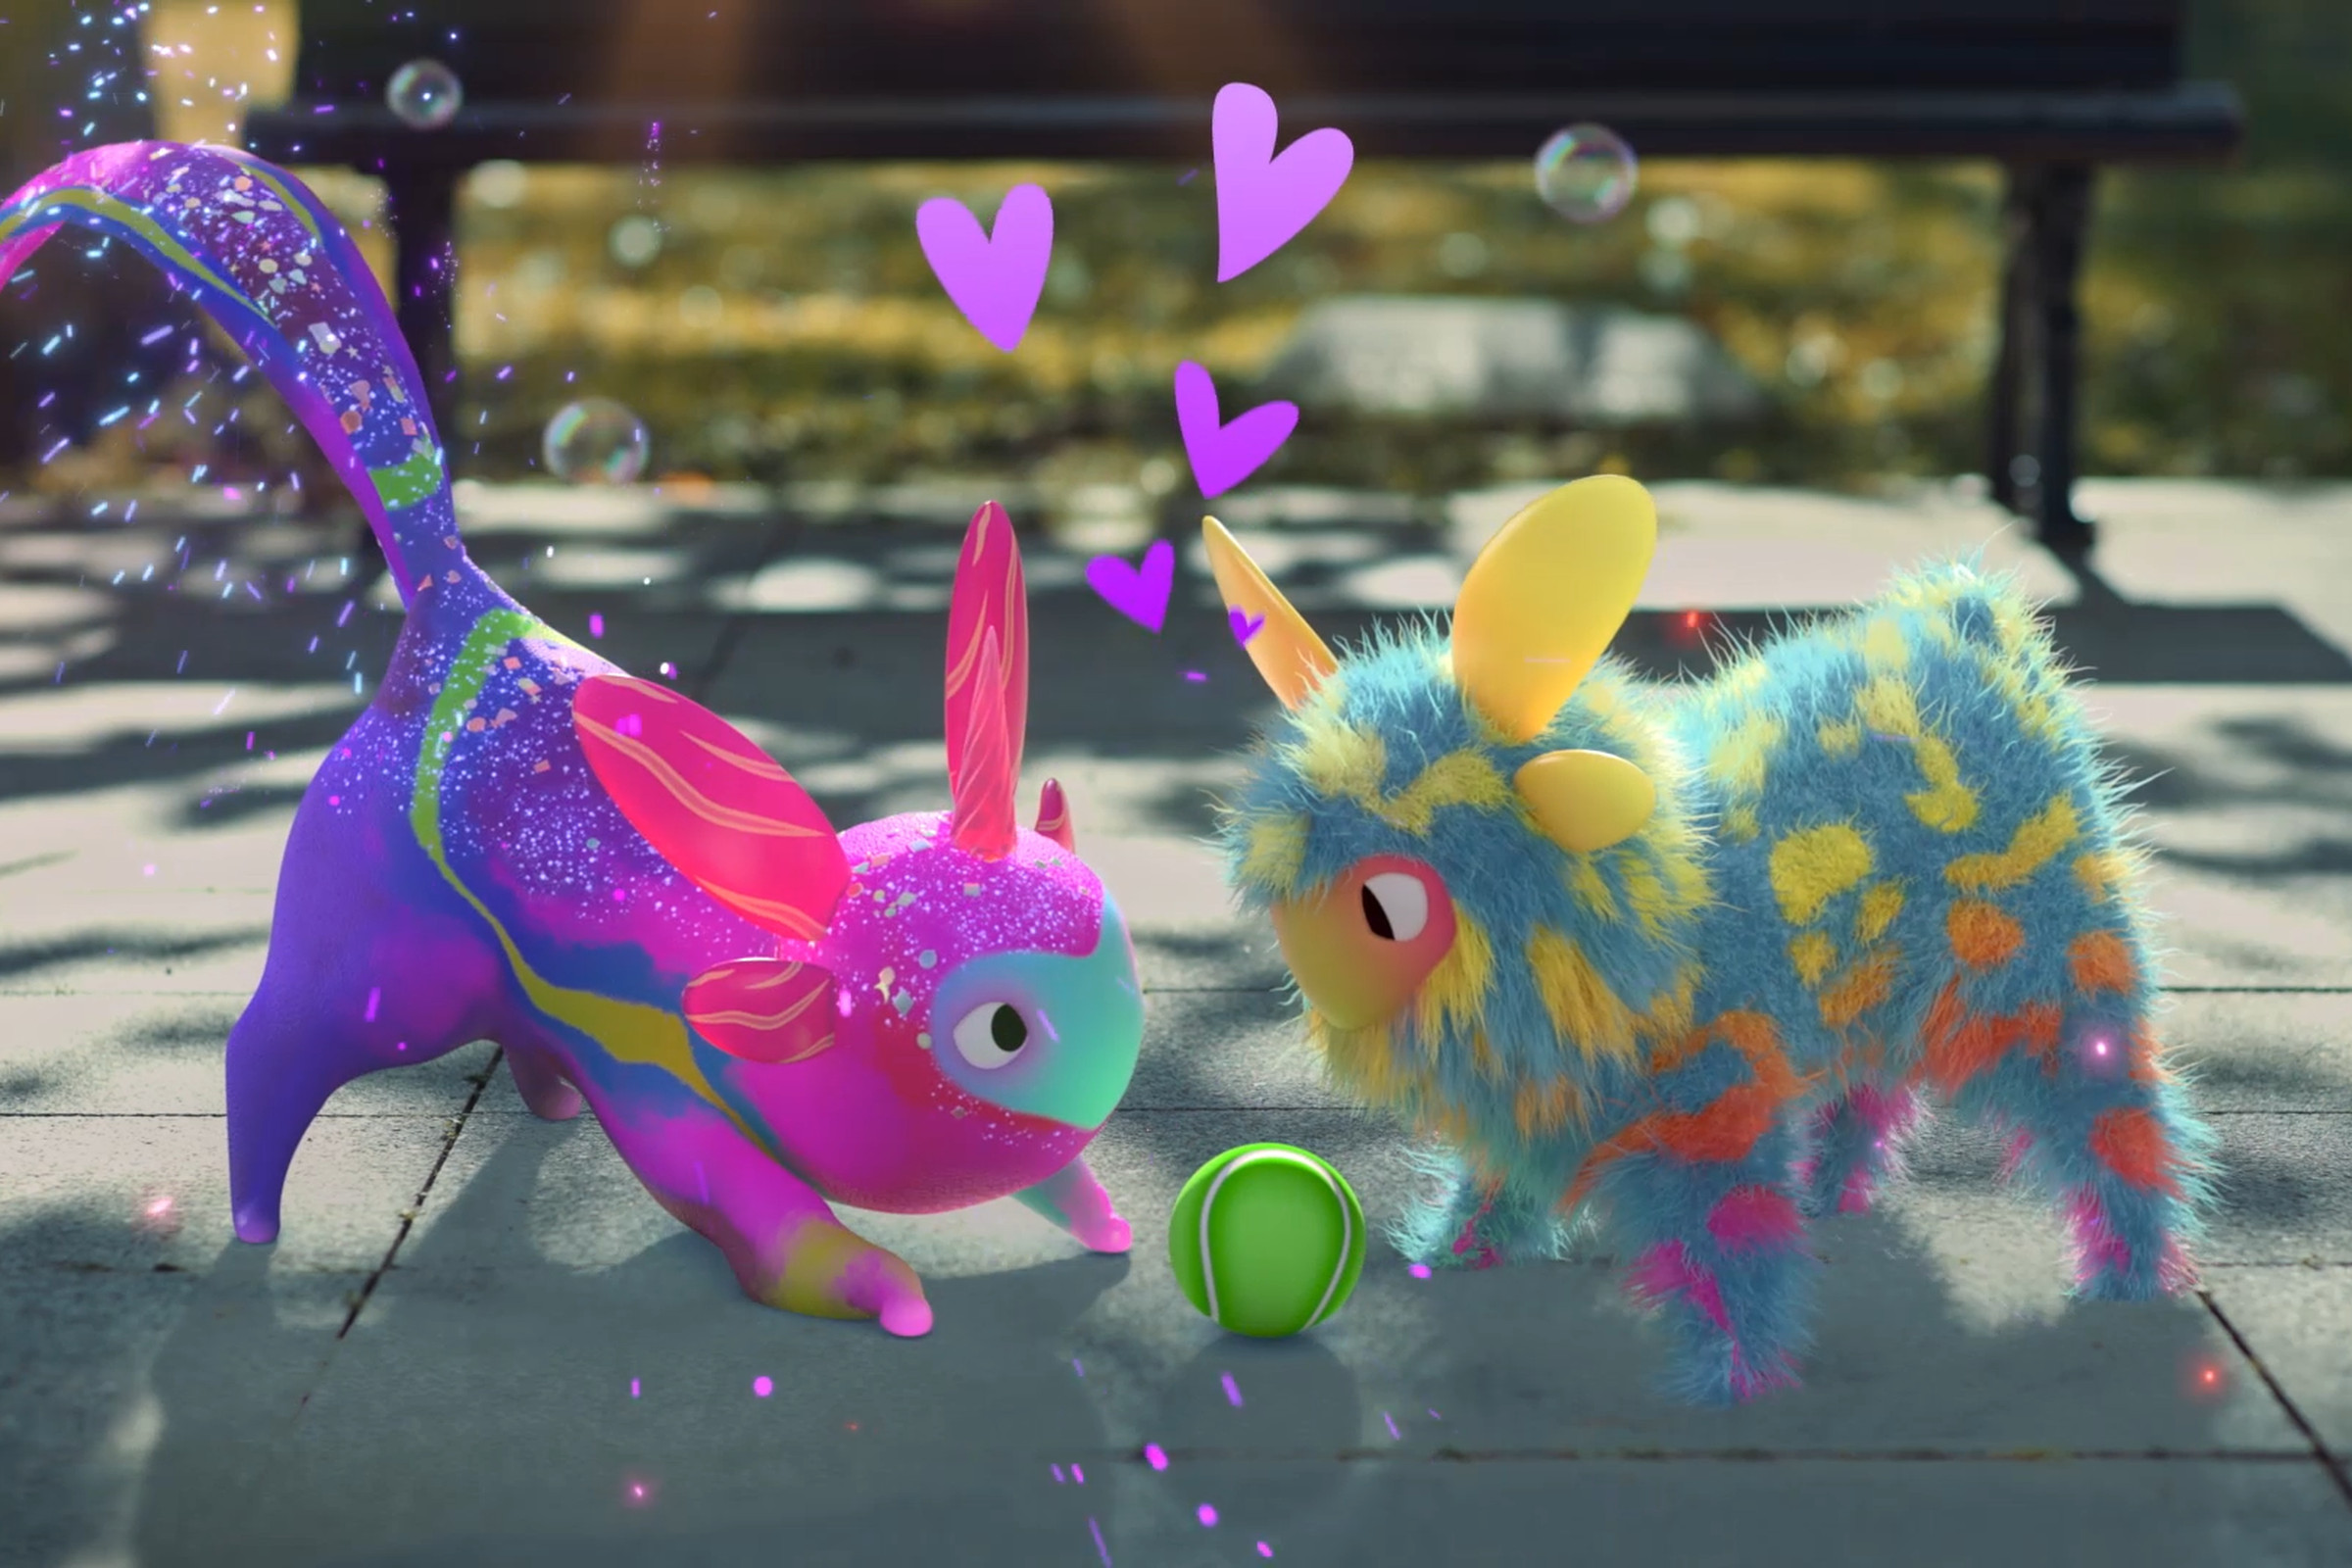 Screenshot from Peridot featuring two “Dots” — colorful alien pet creatures playing with a tennis ball.